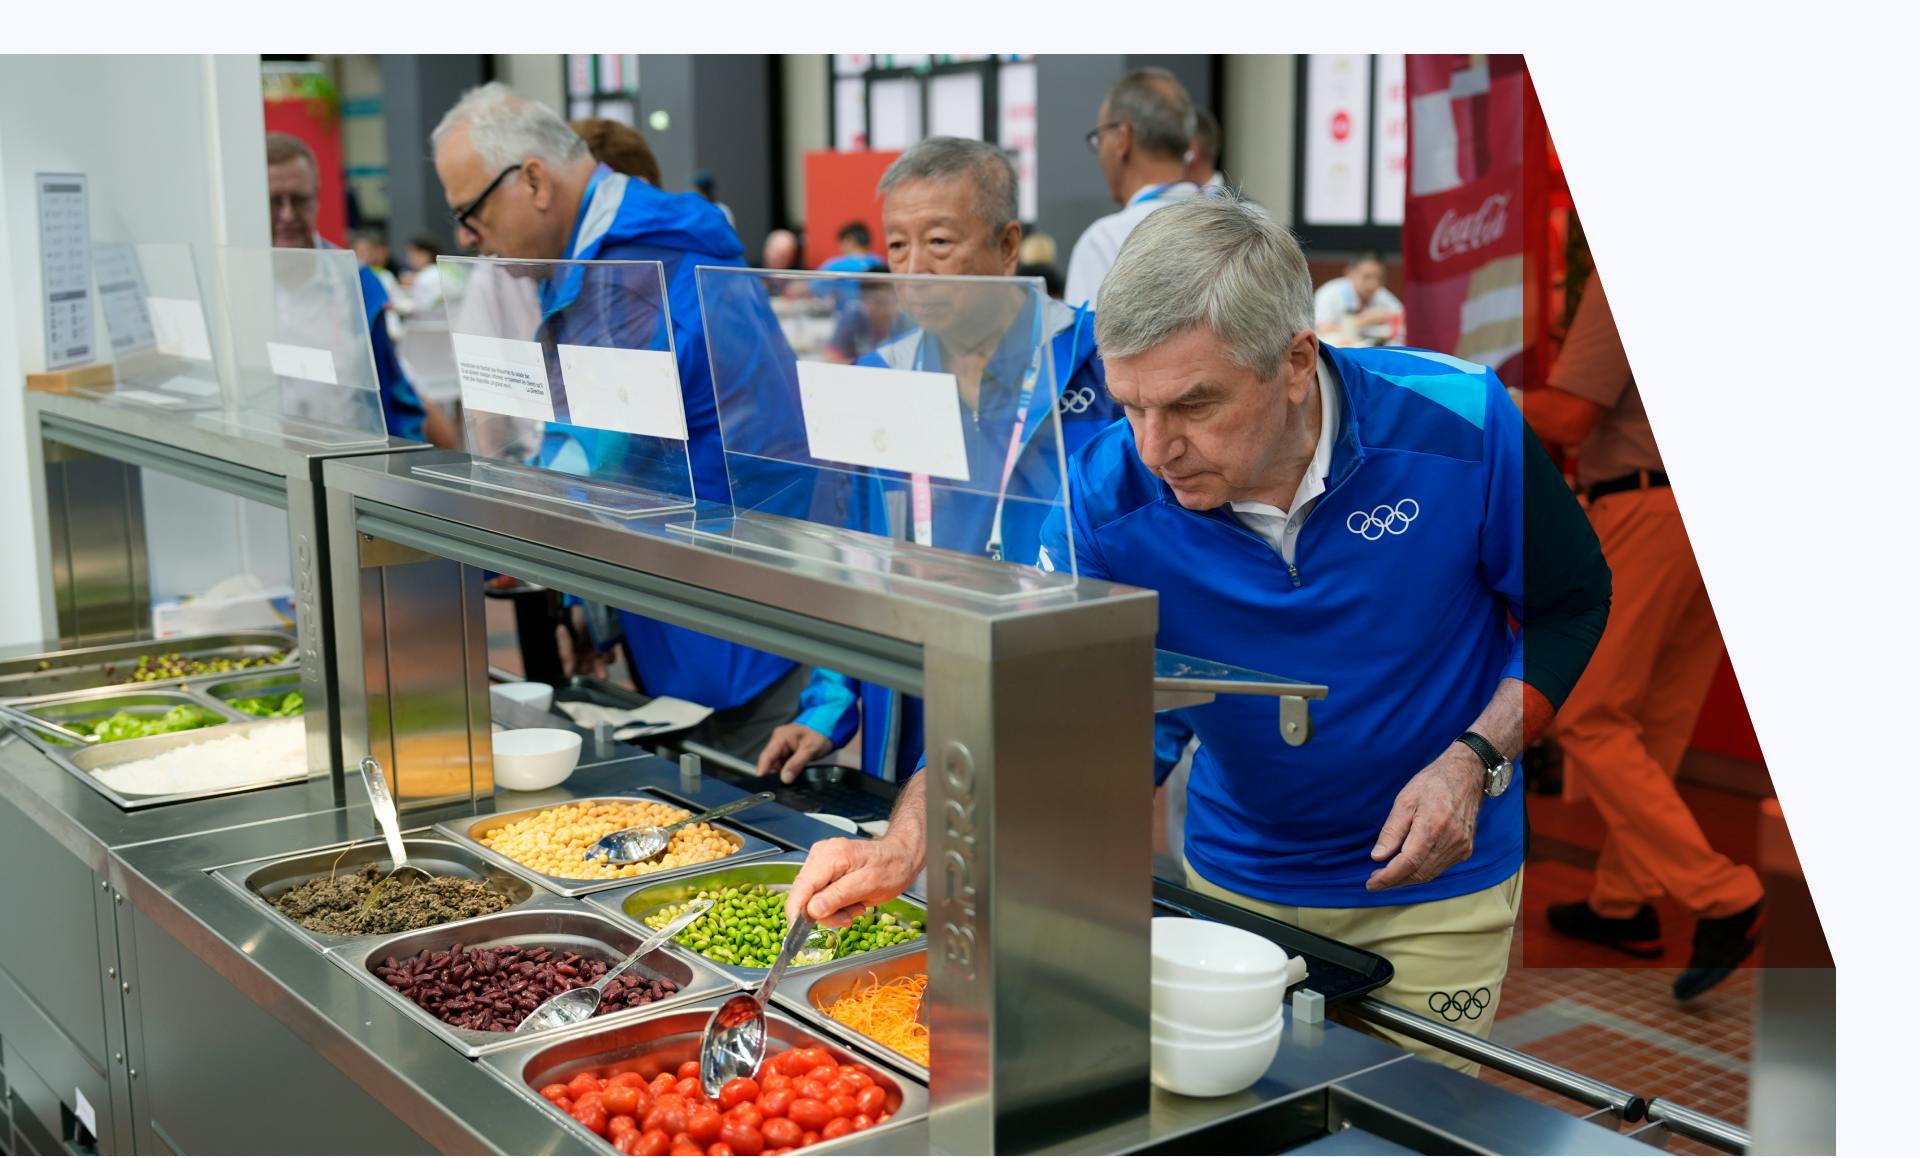 IOC staff trying food from a salad bar while touring the Olympic Village.